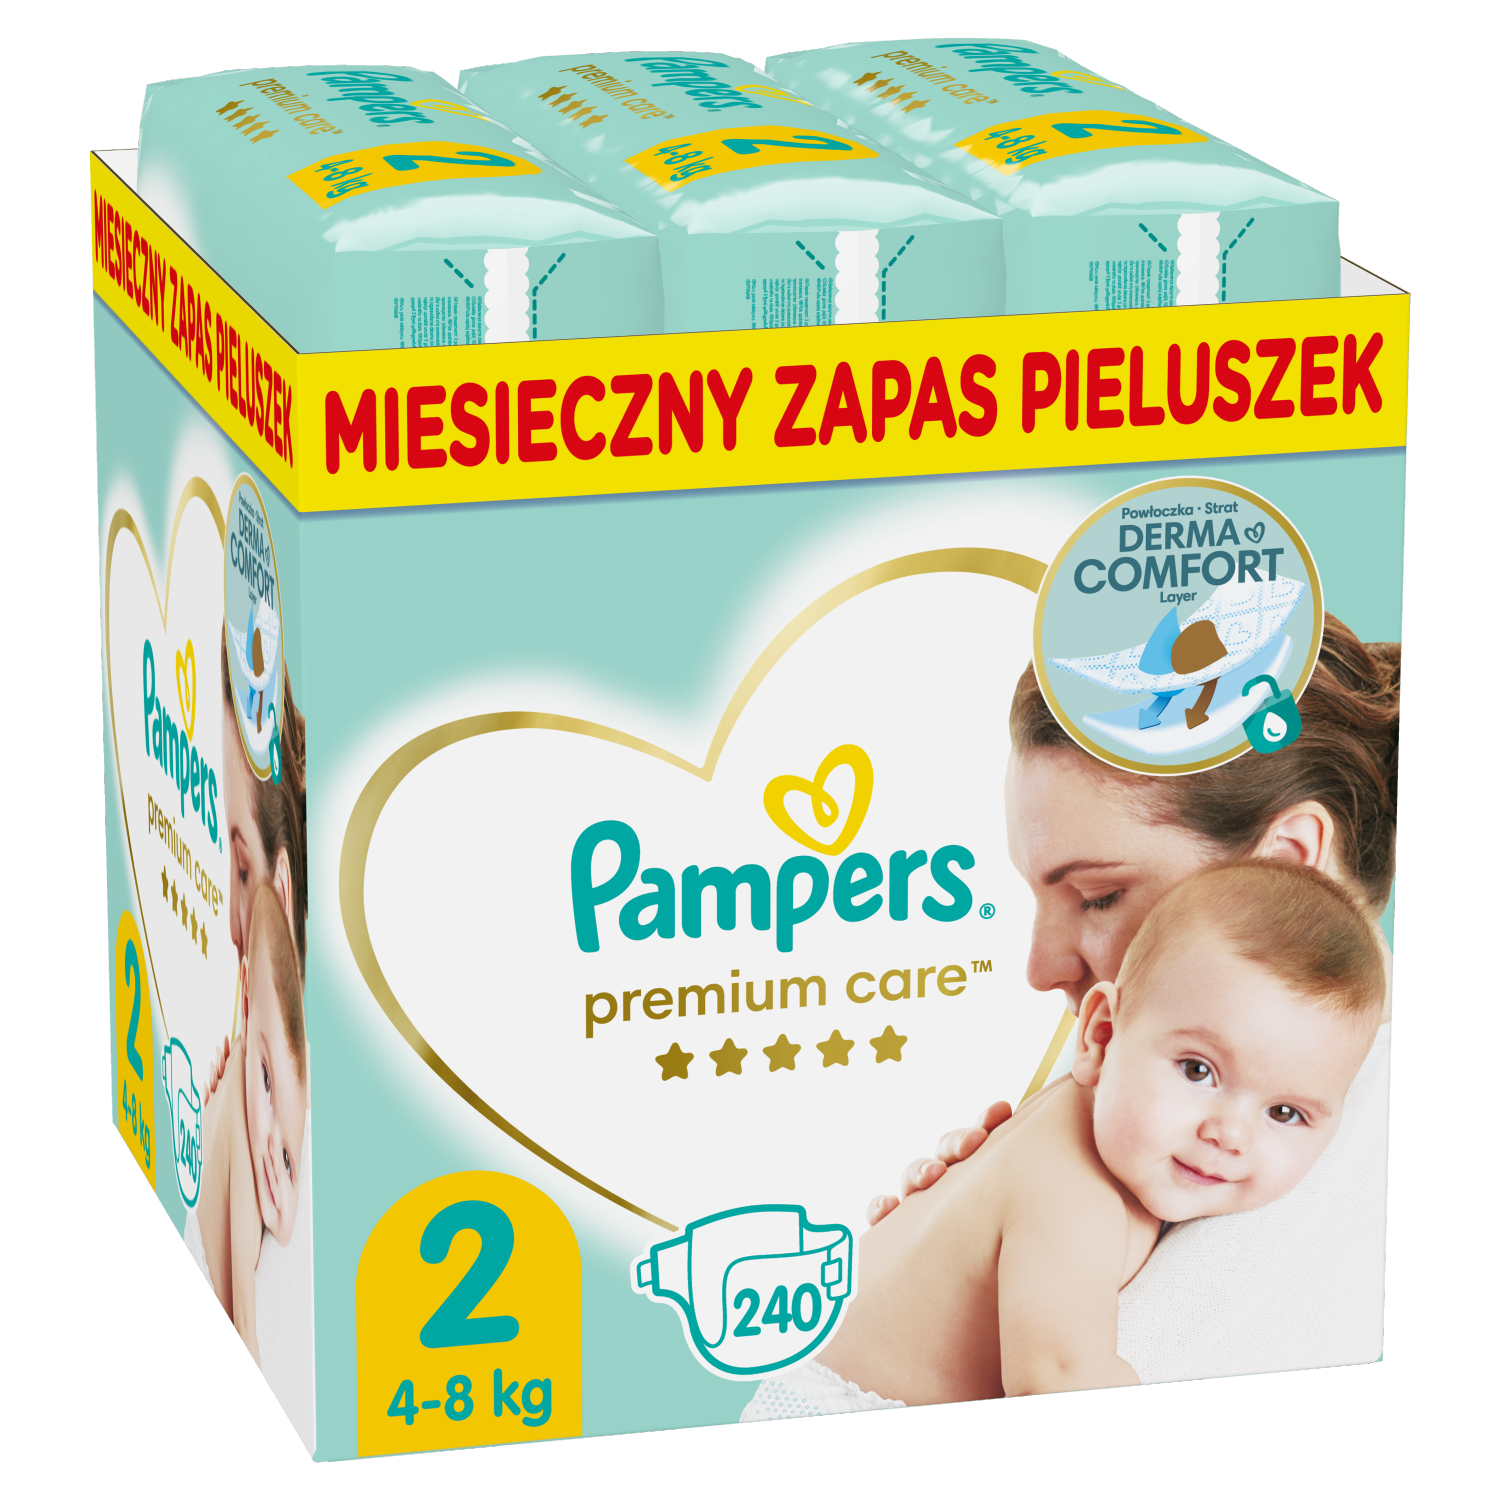 pampers pure protection analiza